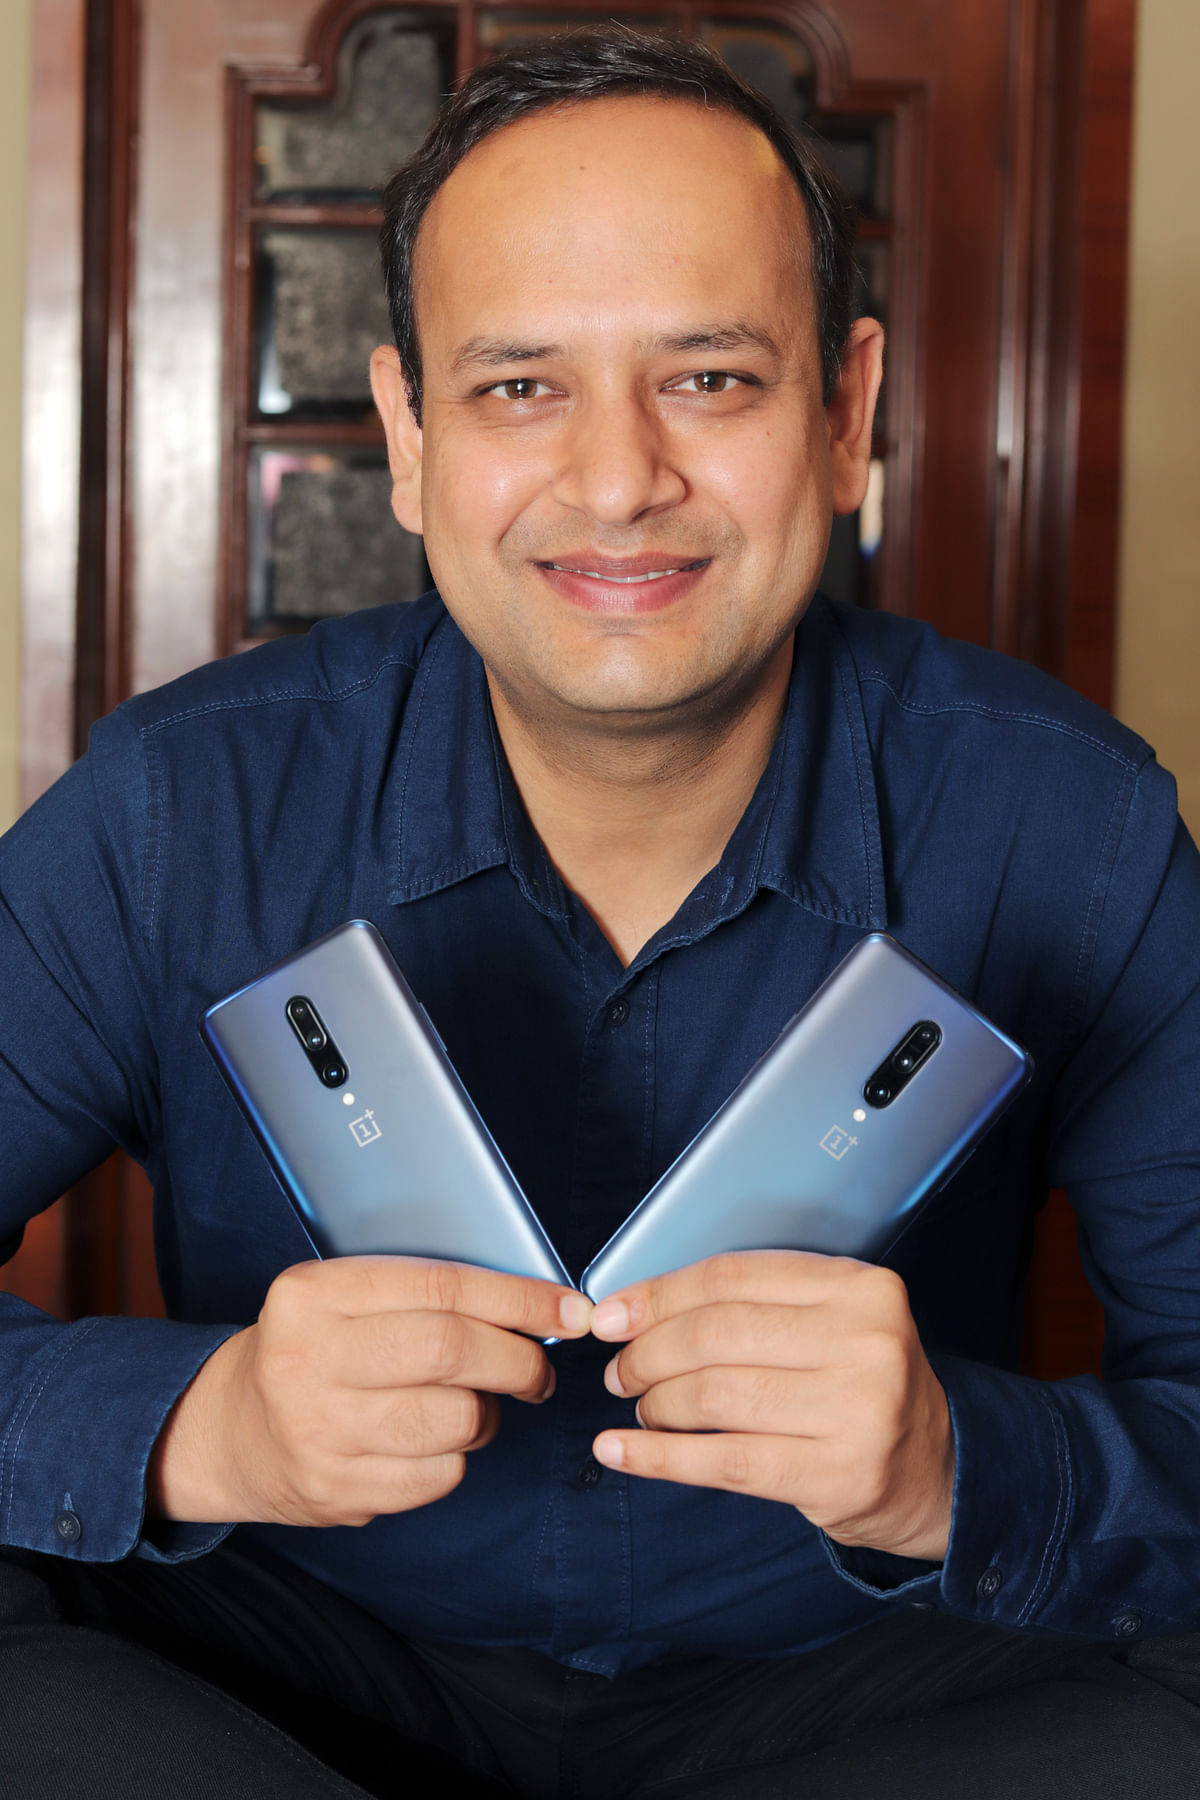 "Activations like music fests will help widen our reach": Vikas Agarwal, OnePlus